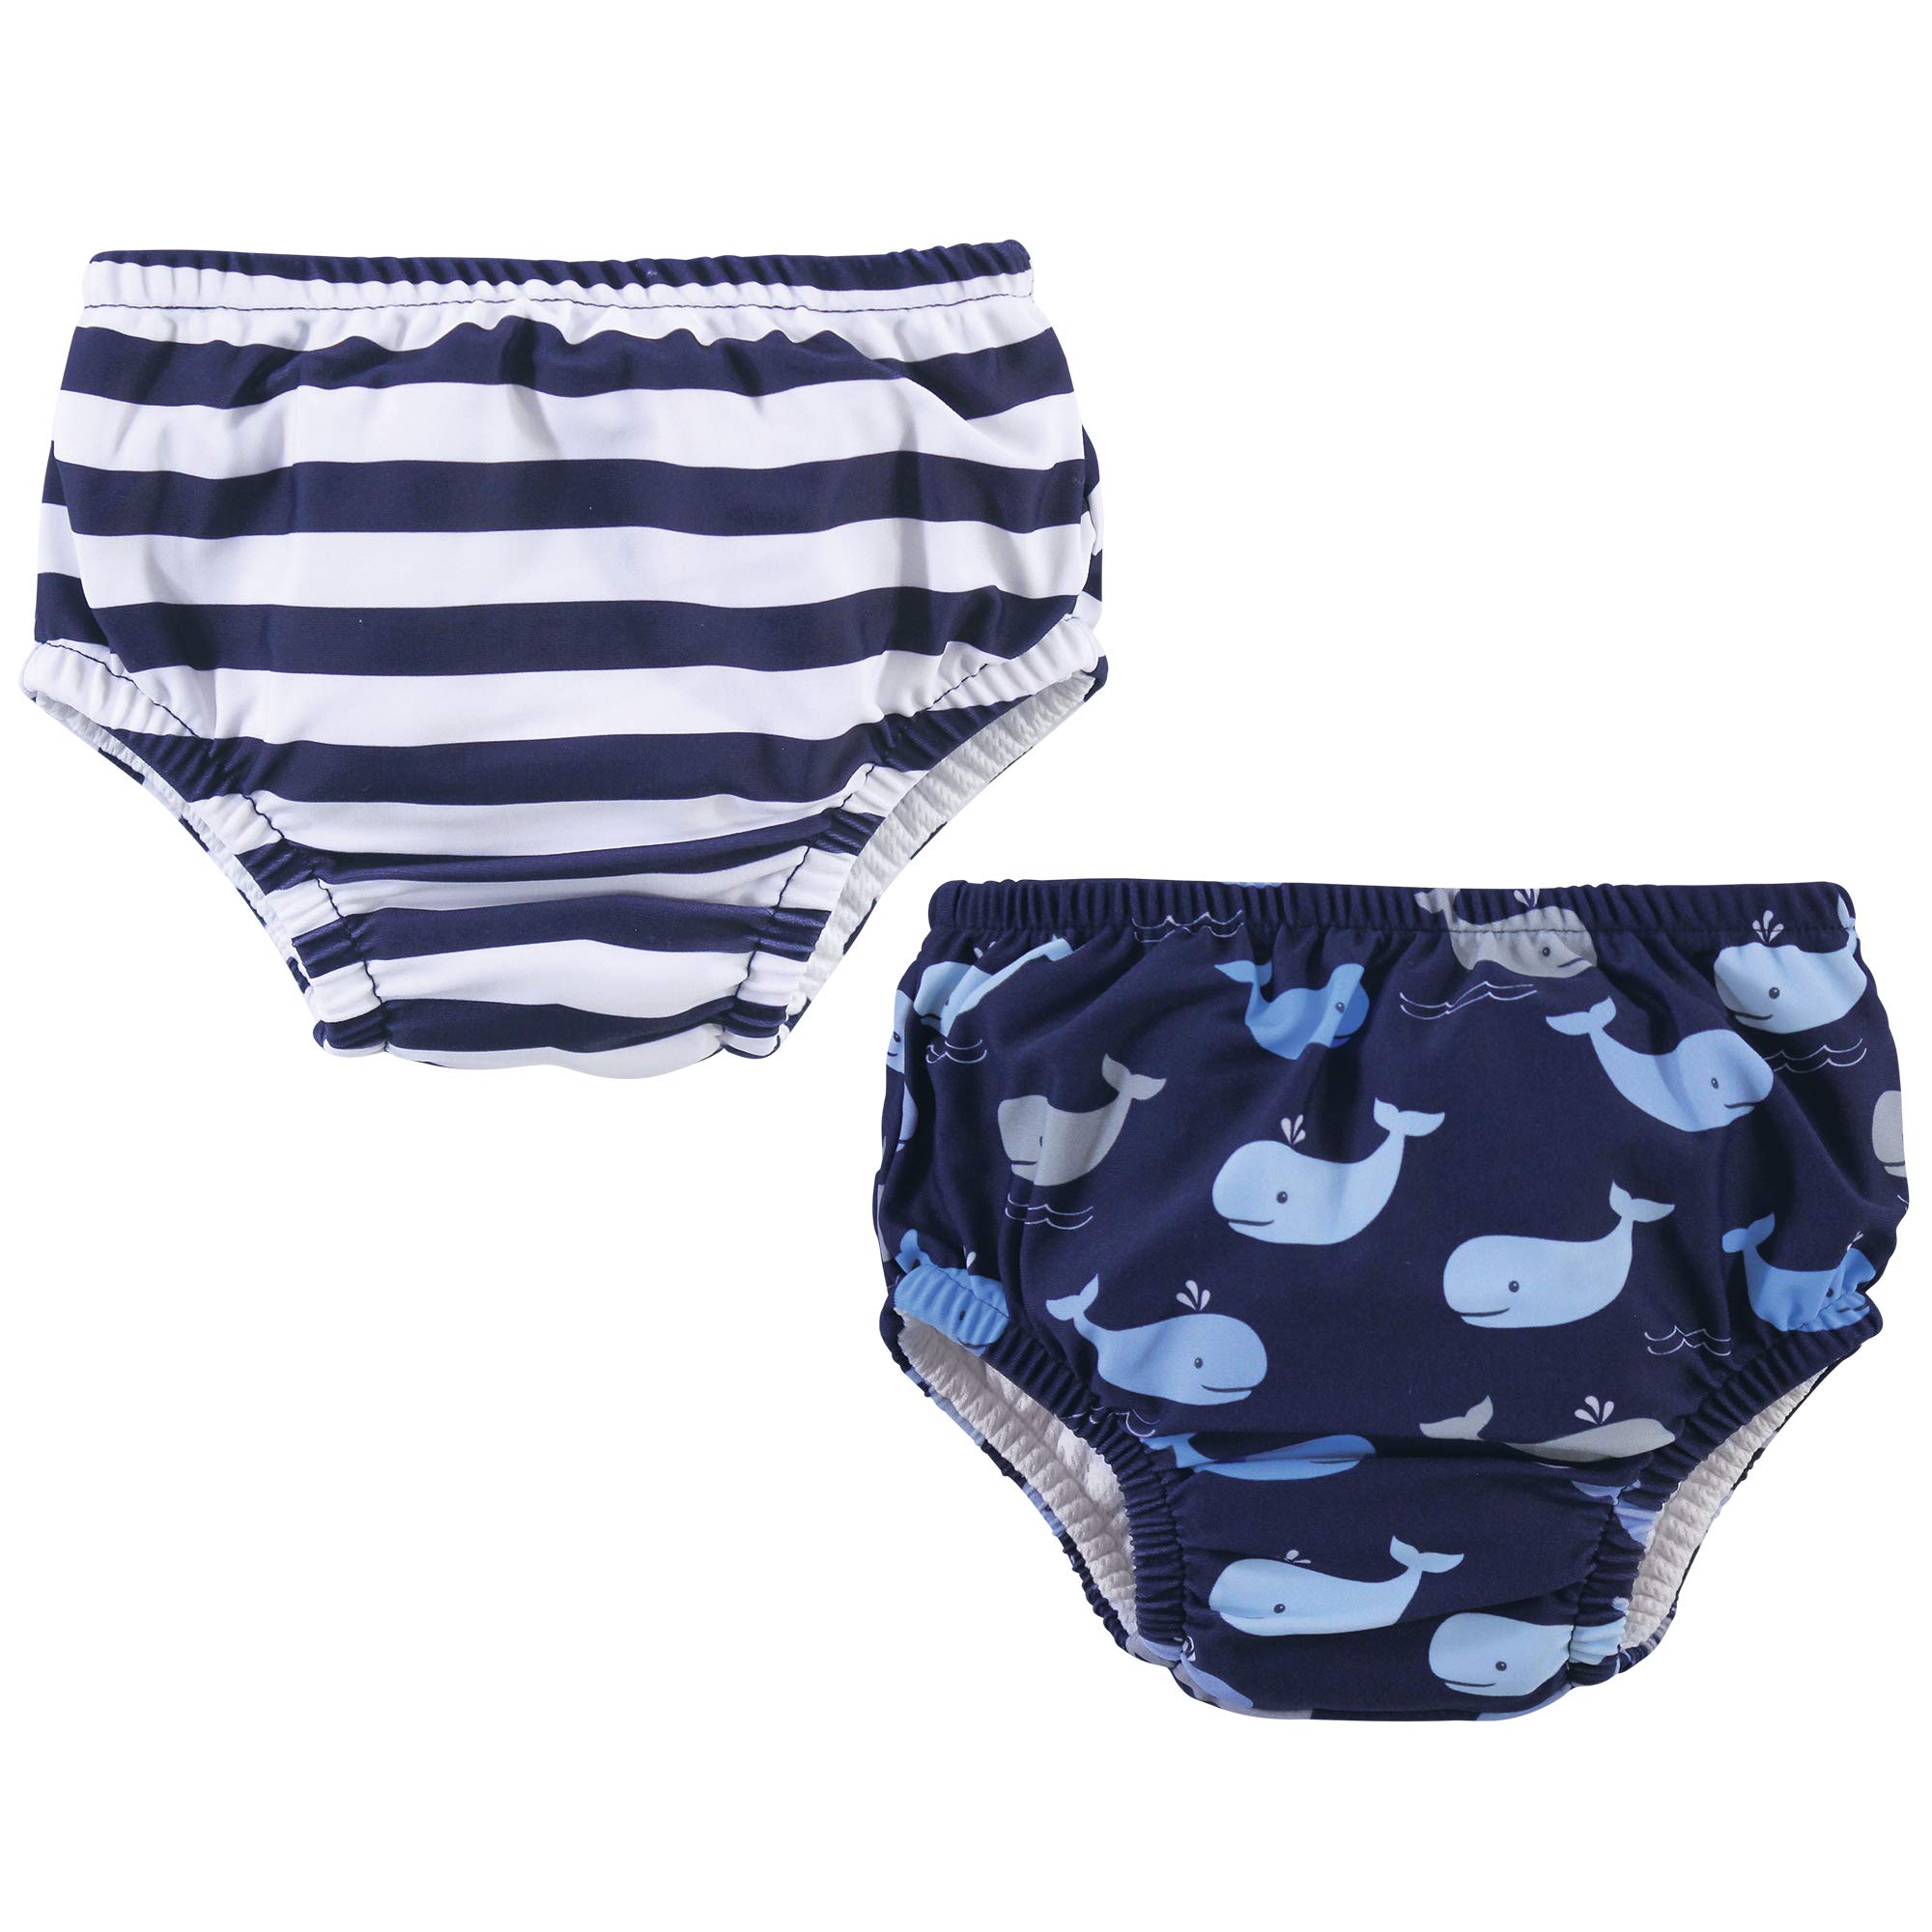 Hudson Baby Unisex Baby Swim Diapers, Whales, 18-24 Months 18-24 Month  Whales